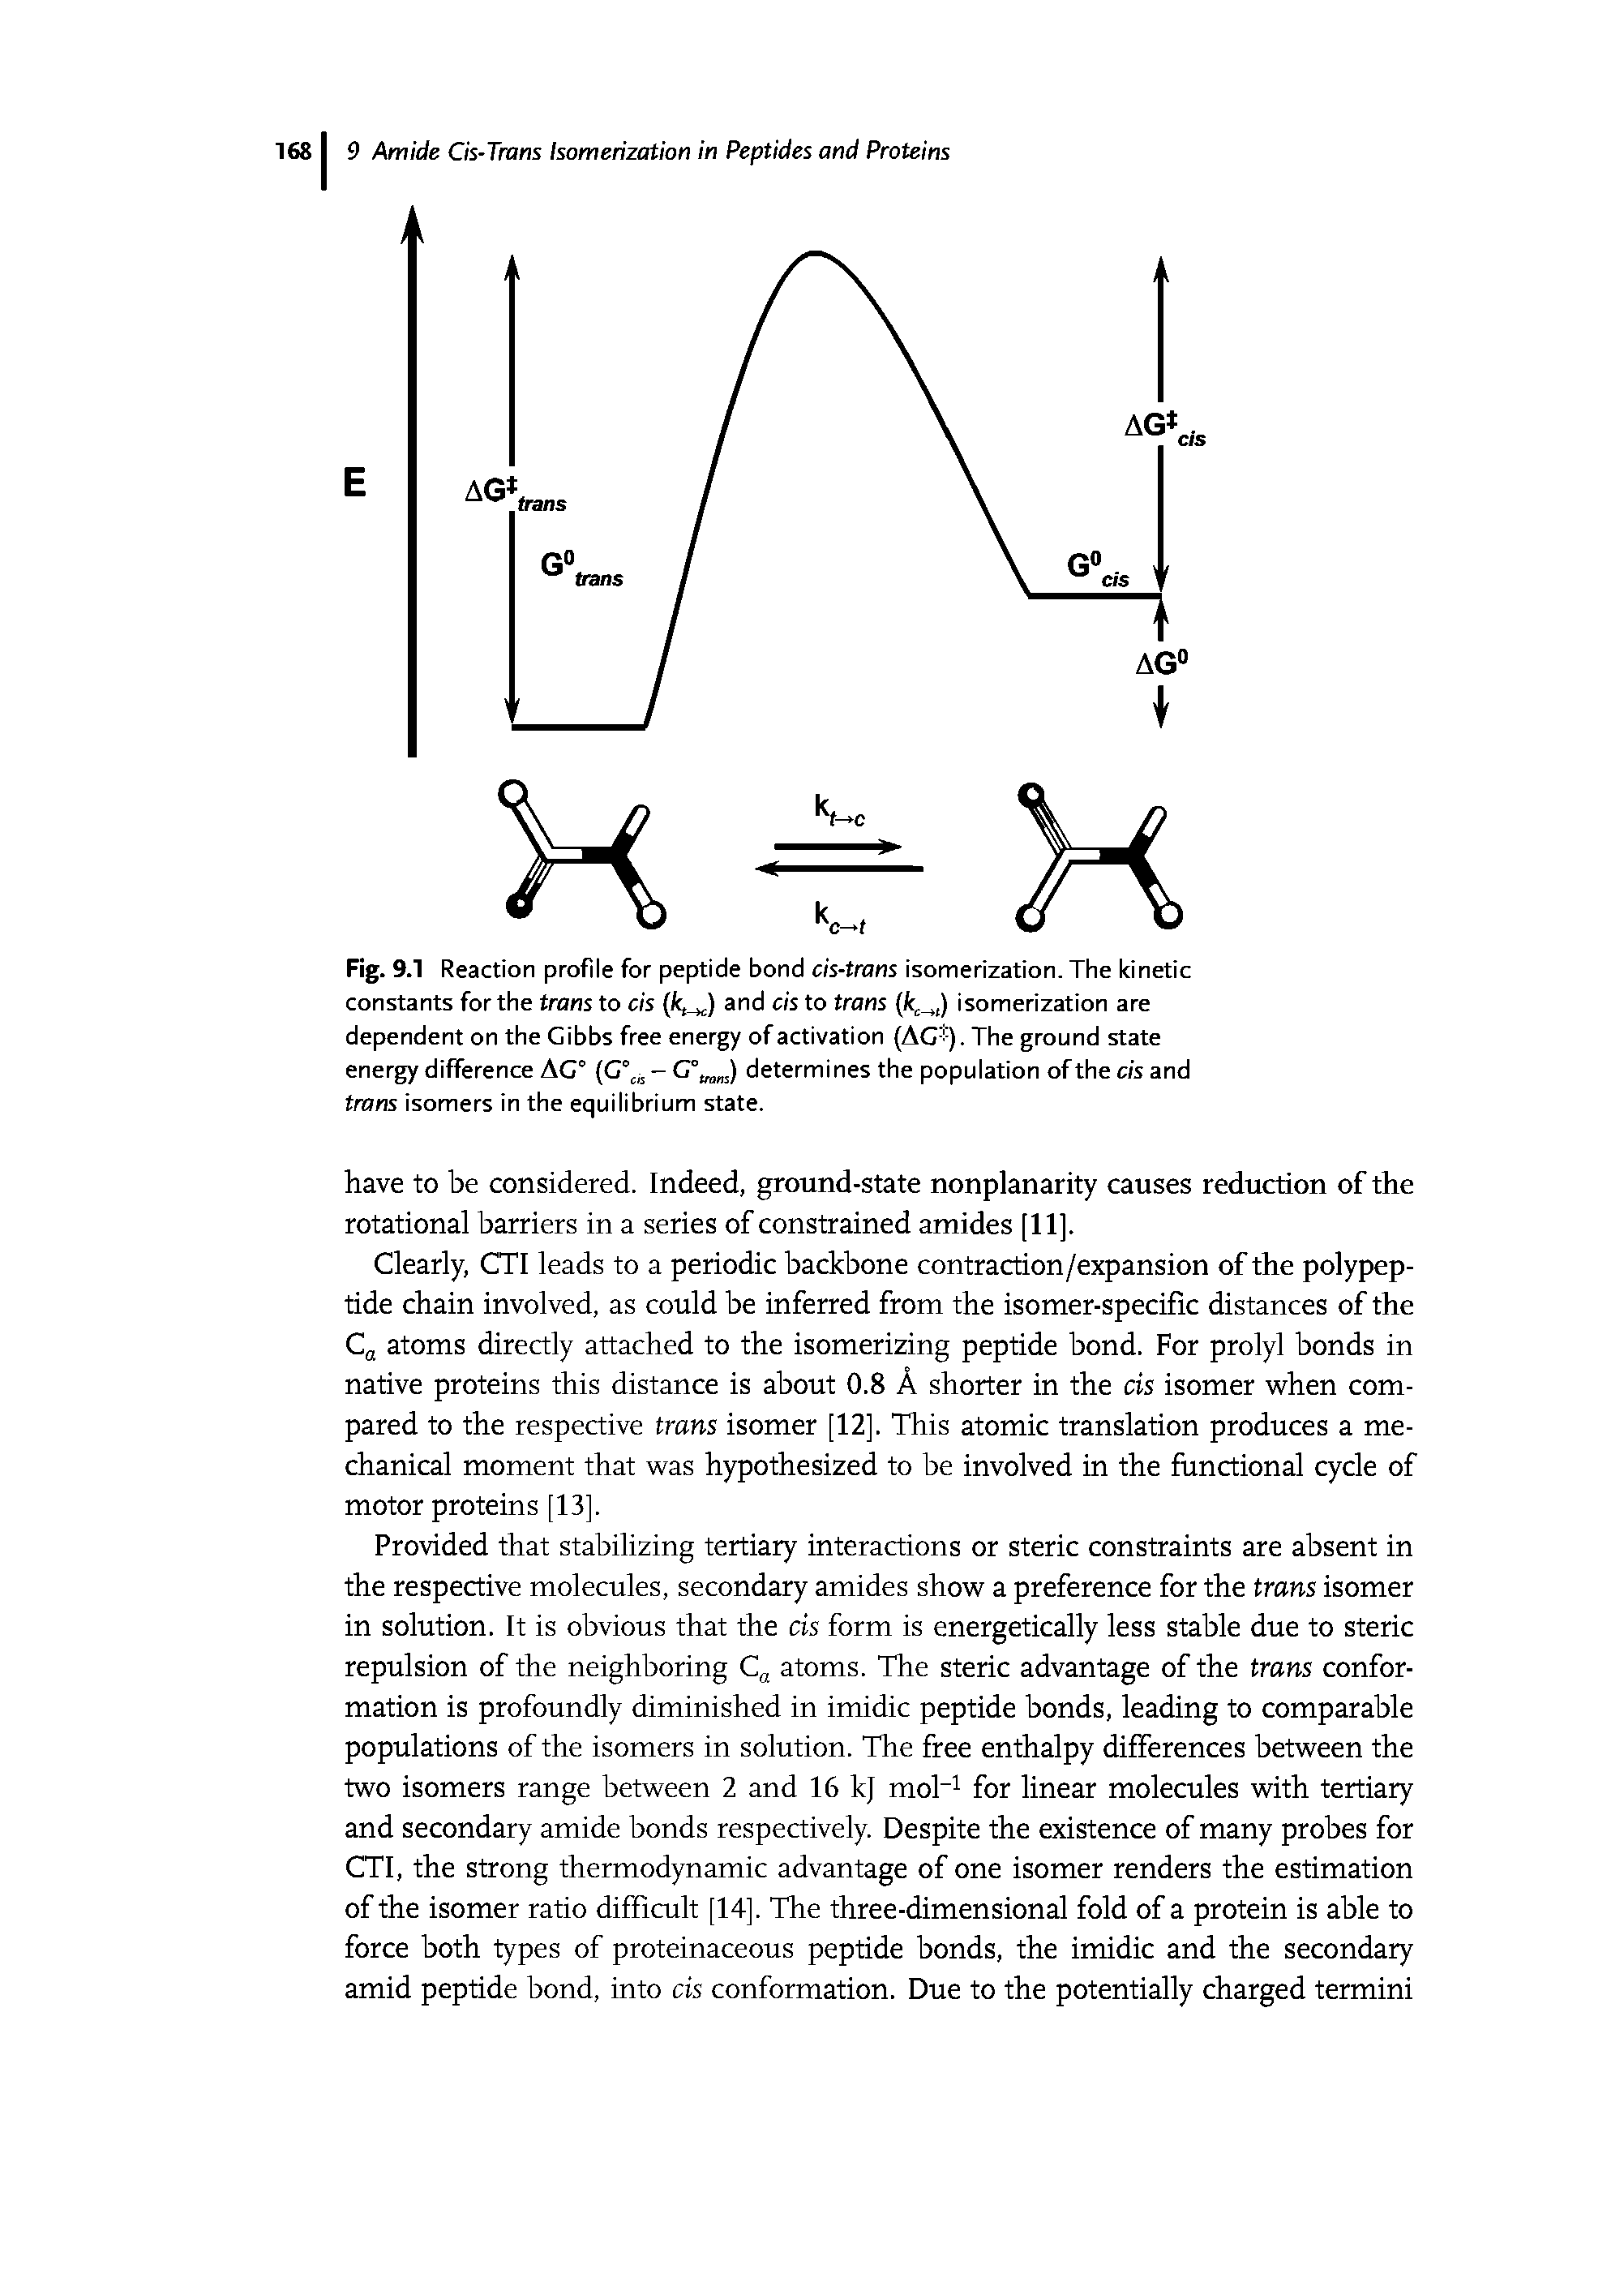 Fig. 9.1 Reaction profile for peptide bond cis-trans isomerization. The kinetic constants for the trans to cis (k, J and cis to trans (kM>) isomerization are dependent on the Gibbs free energy of activation (AG ). The ground state energy difference AG° (G°as - C°mm) determines the population of the cis and trans isomers in the equilibrium state.